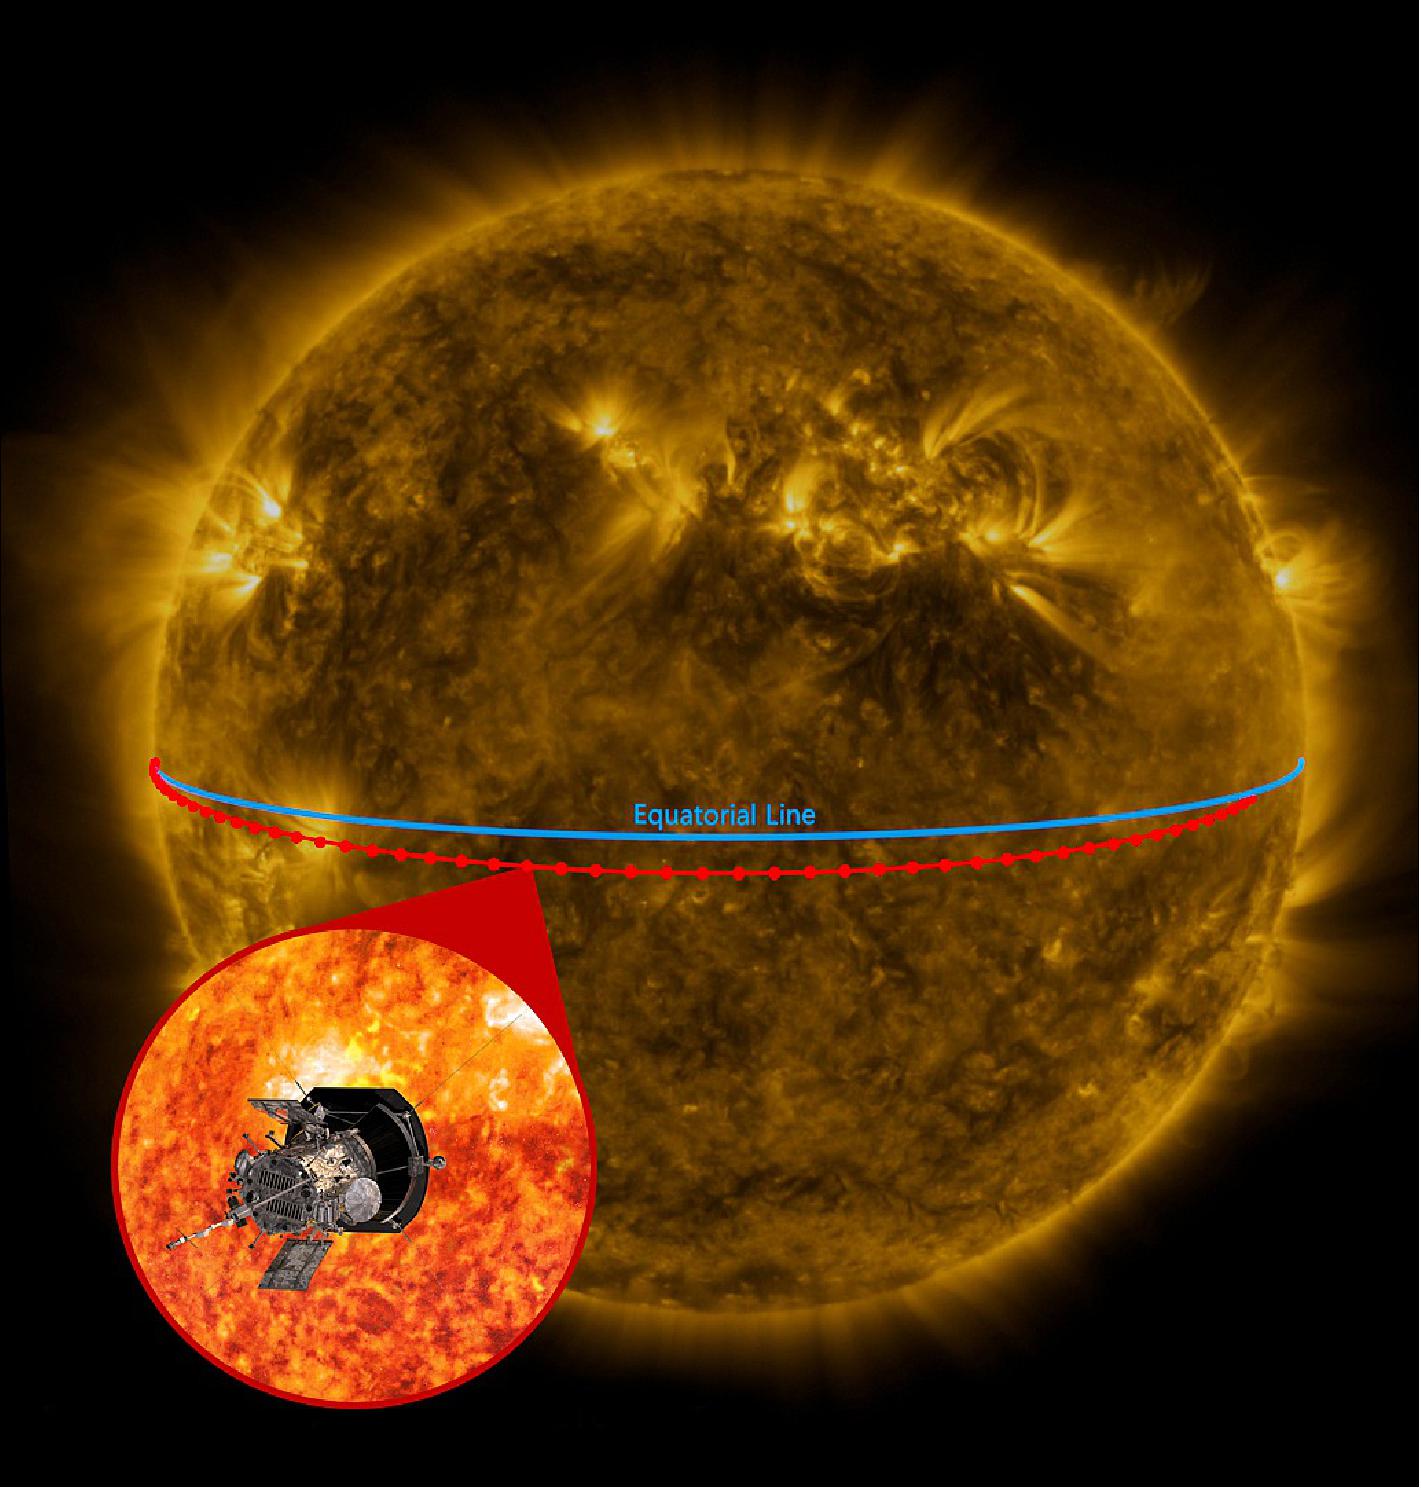 Figure 22: The view from Earth: The red line indicates the path of NASA's Parker Solar Probe across the face of the Sun, as seen from Earth, from Feb. 24-27, 2022. The red dots indicate an hour along the trajectory, and the appearance of the path heading into the Sun at right accounts for Earth's own movement around our star. The image of the Sun was captured by NASA's Solar Dynamics Observatory (image credit: NASA/Johns Hopkins APL/Steve Gribben/SDO)